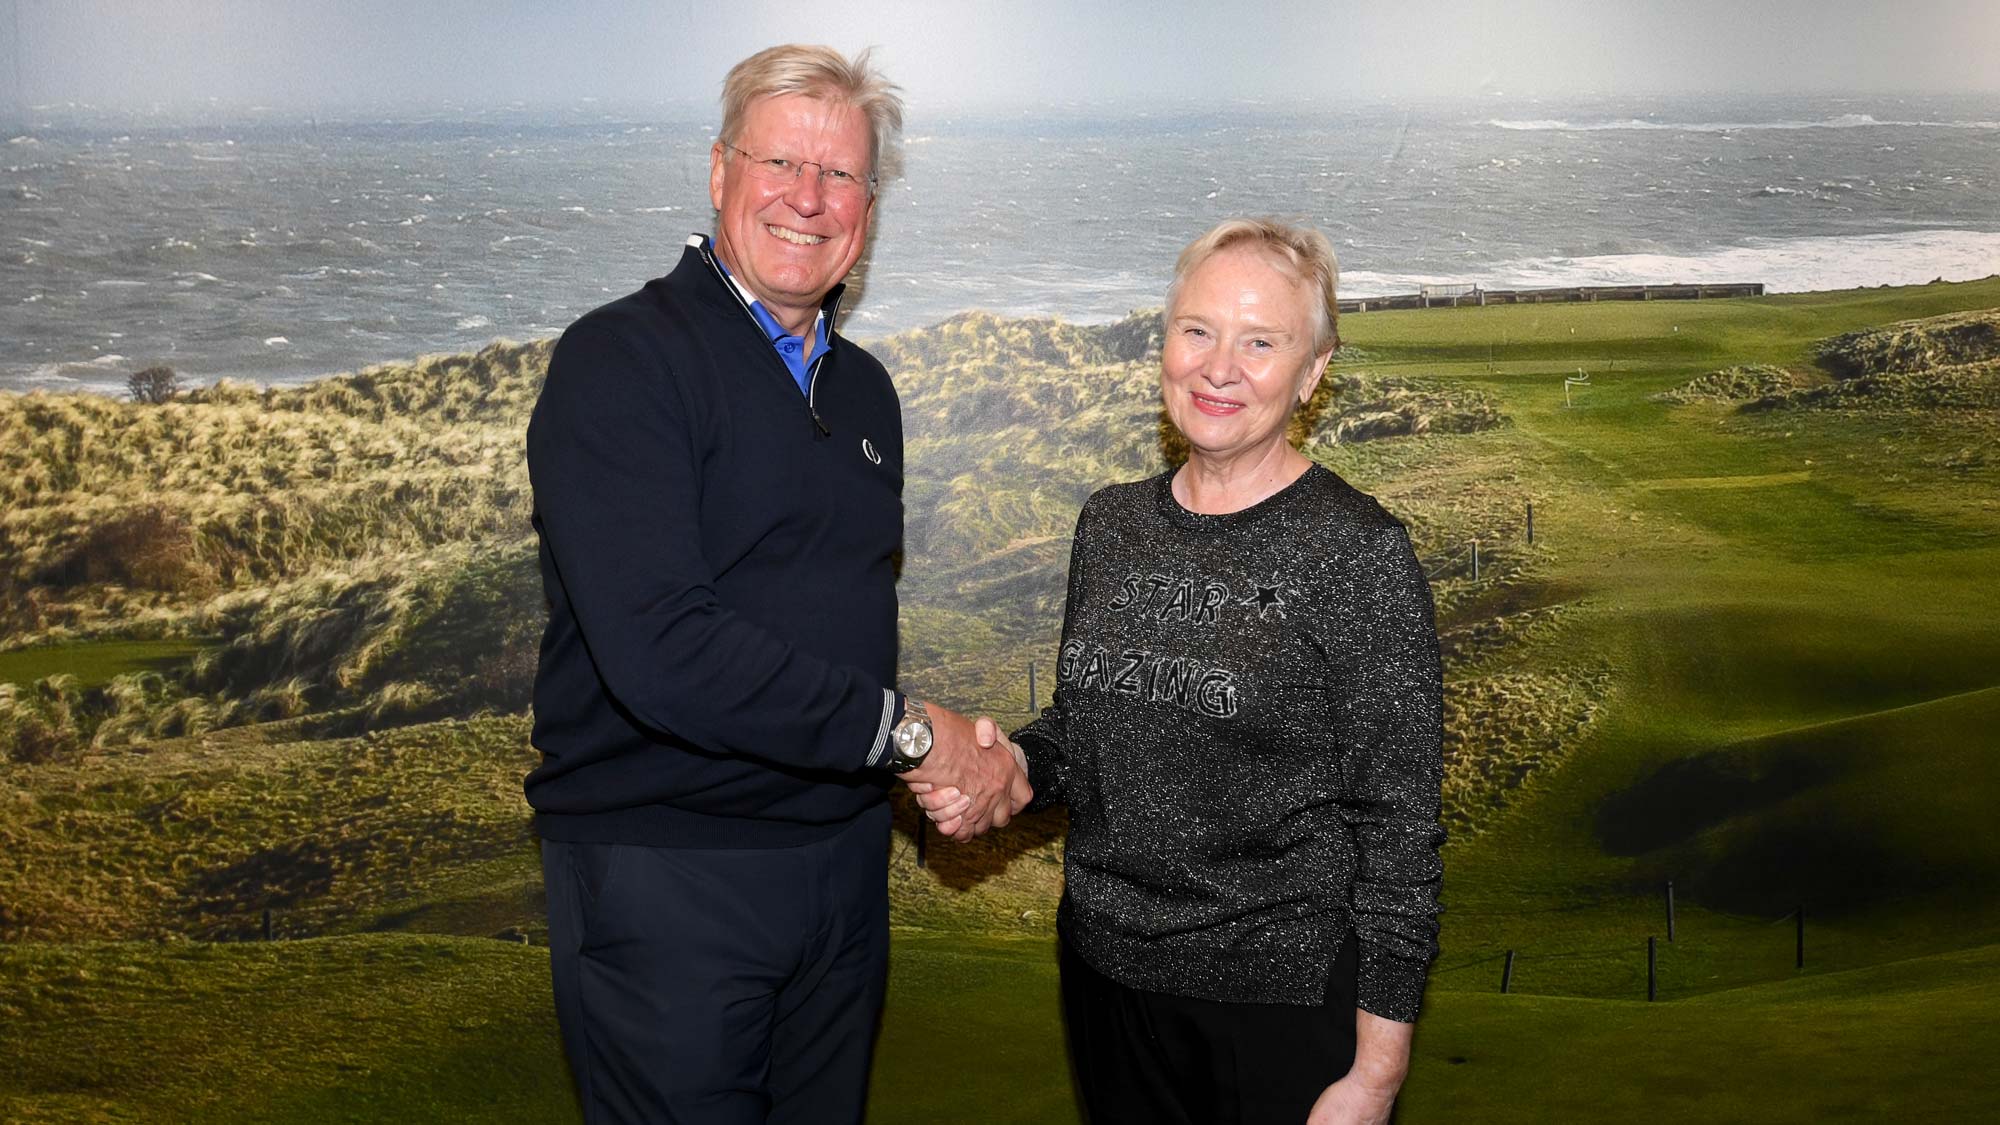 Martin Slumbers, Chief Executive of The R&A and Ann Cairns, Executive Vice-Chairman of Mastercard announce partnership of the AIG Women's British Open.